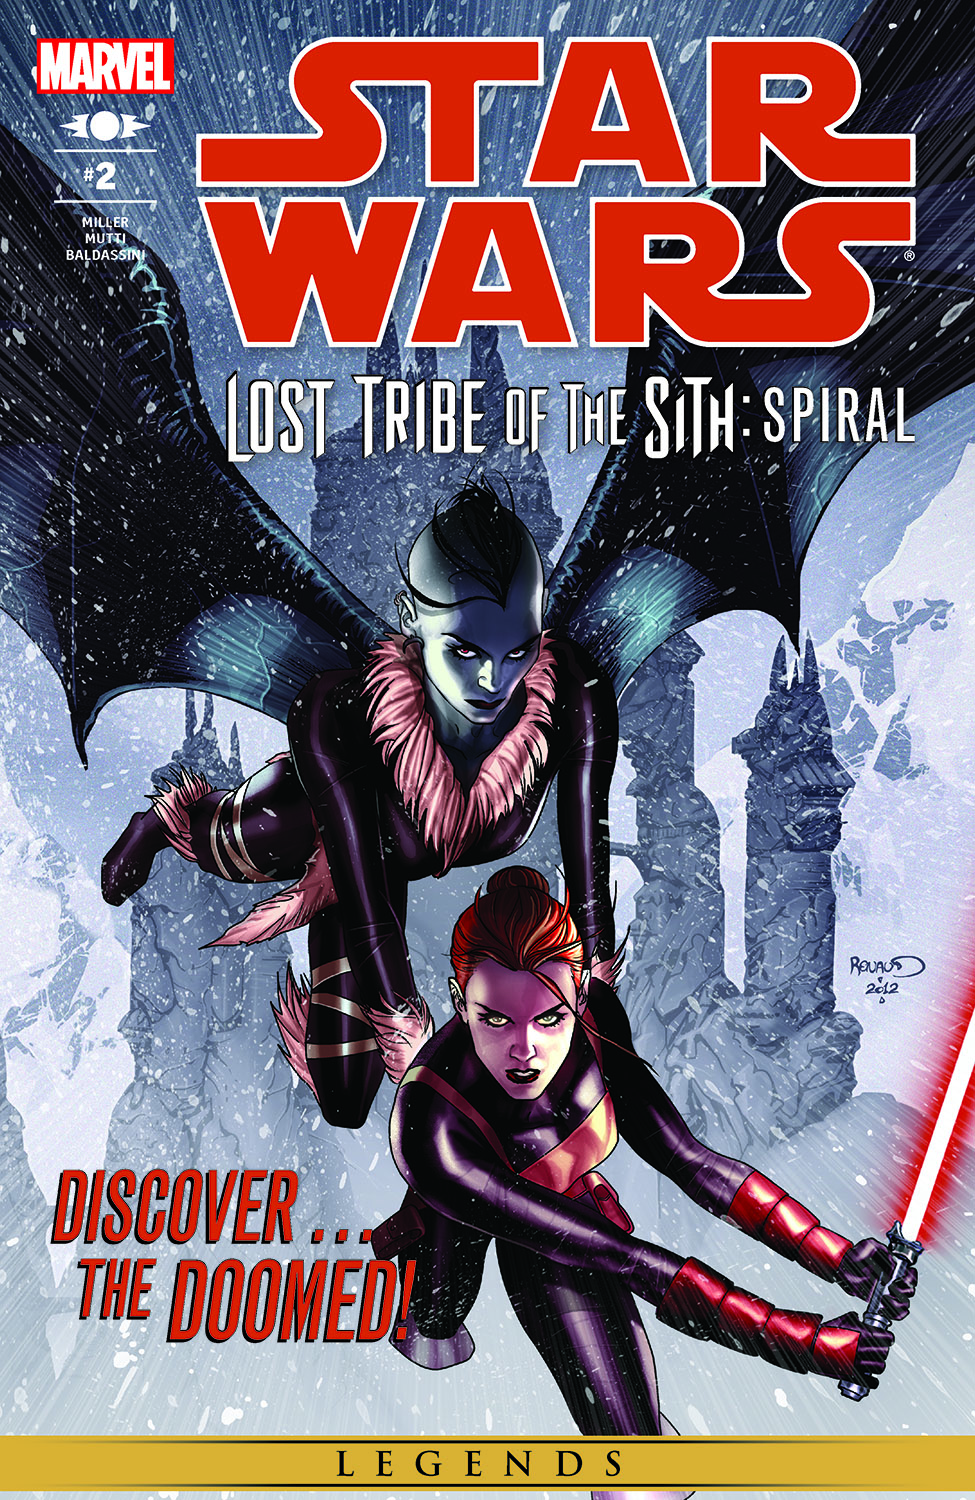 Star Wars: Lost Tribe of the Sith - Spiral (2012) #2